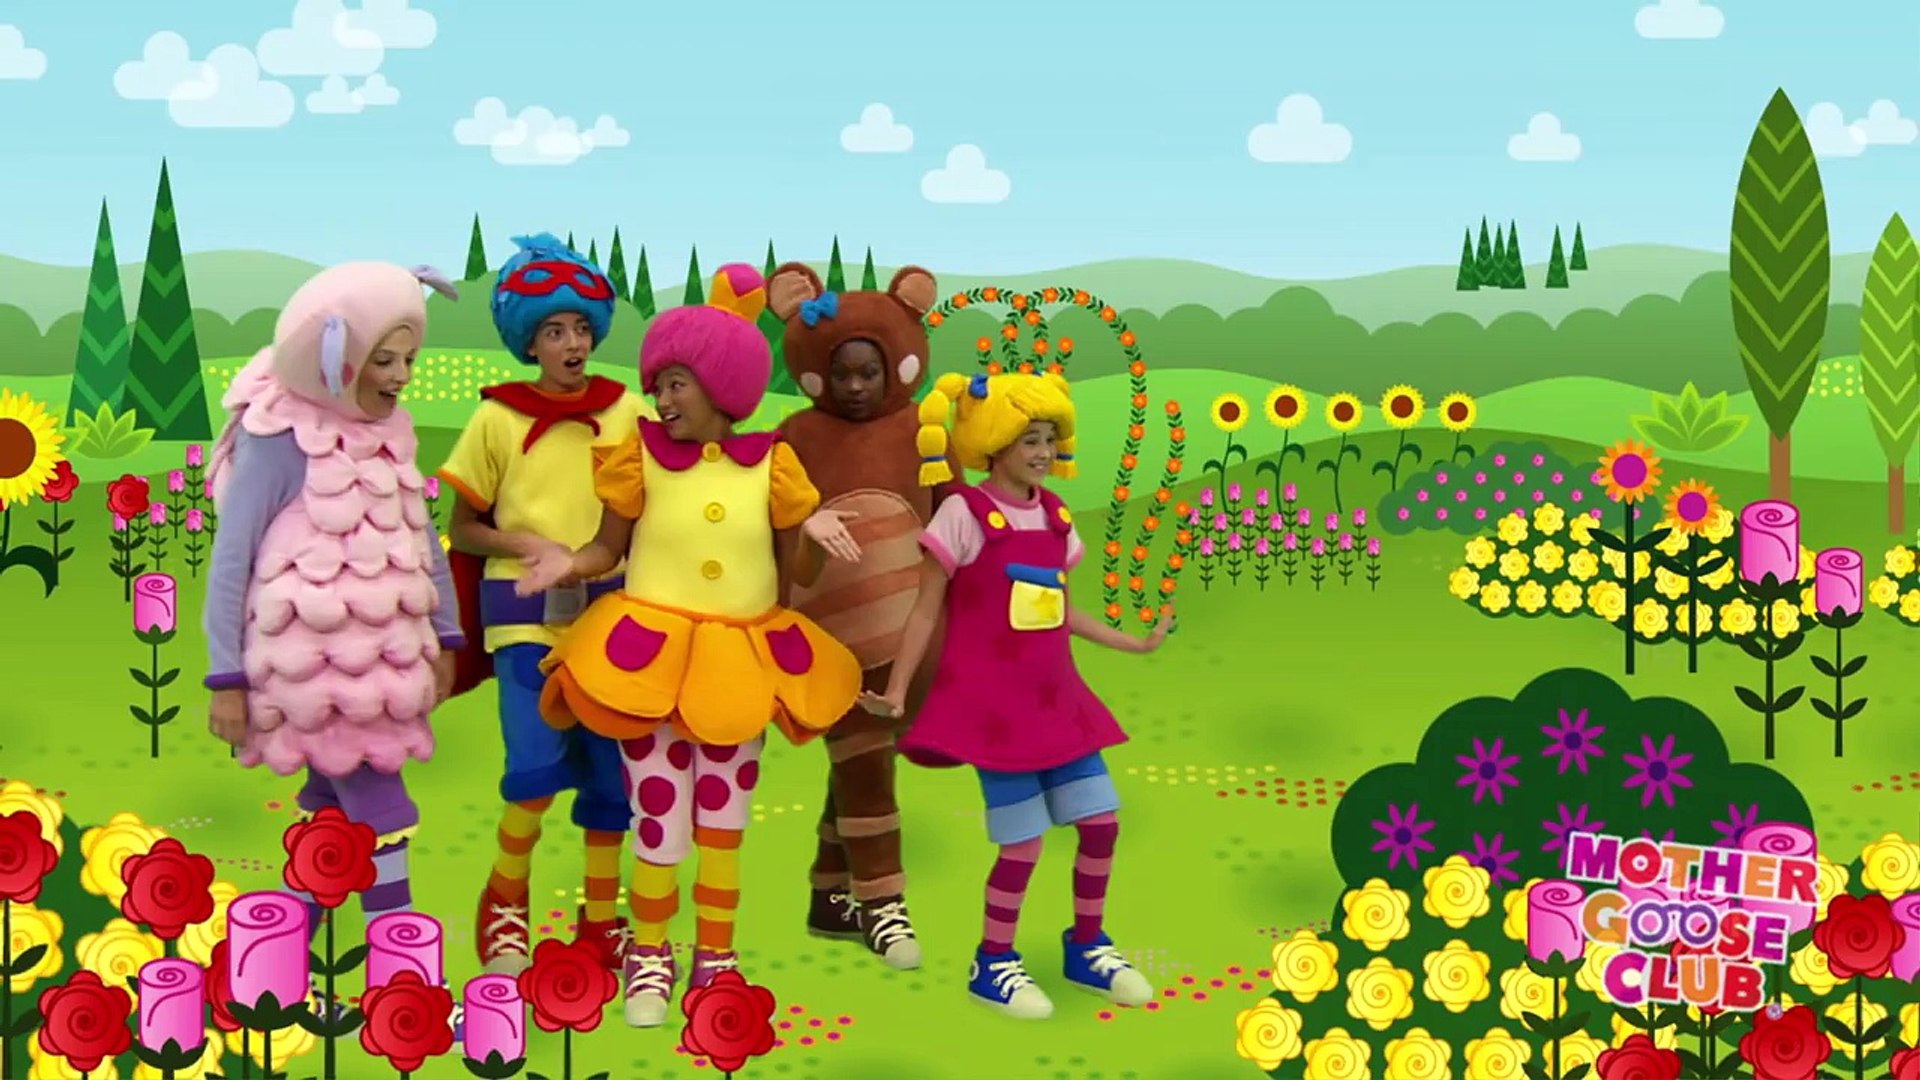 Ring Around the Rosy Mother Goose Club Songs For Children - Dailymotion  Video